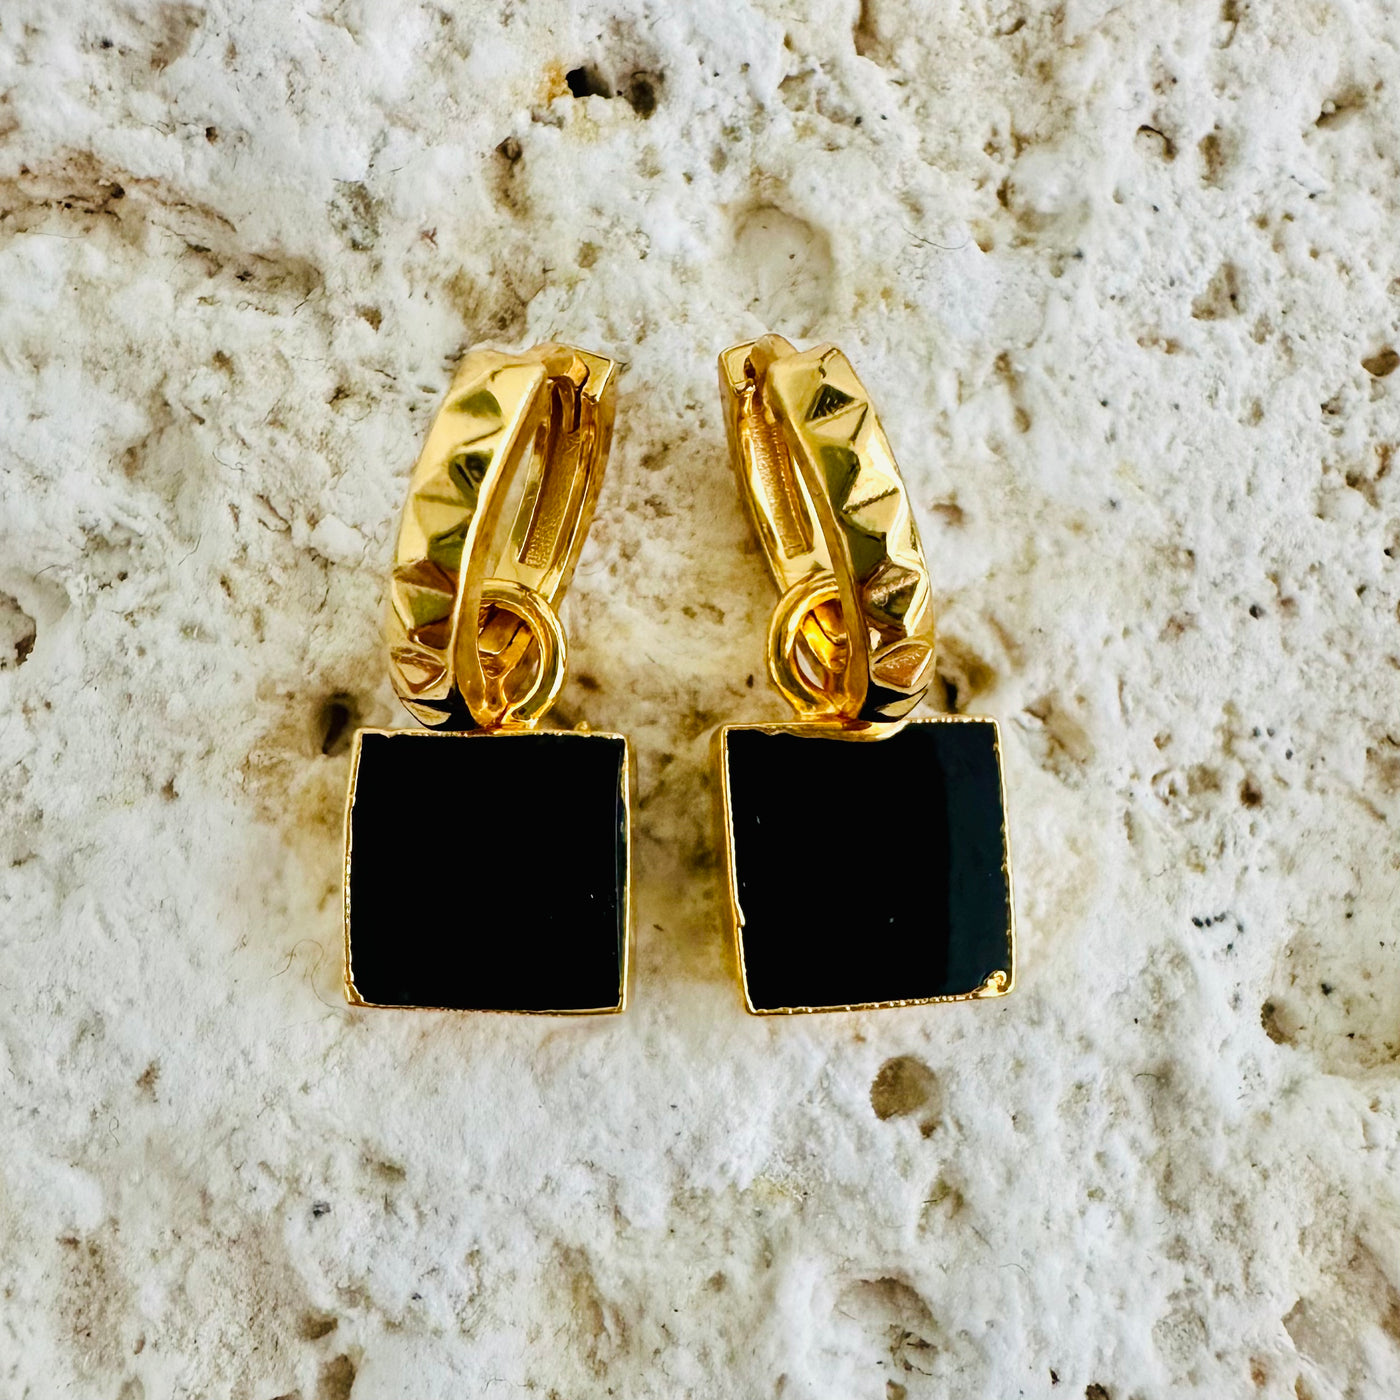 The Square Black Onyx gold hoop